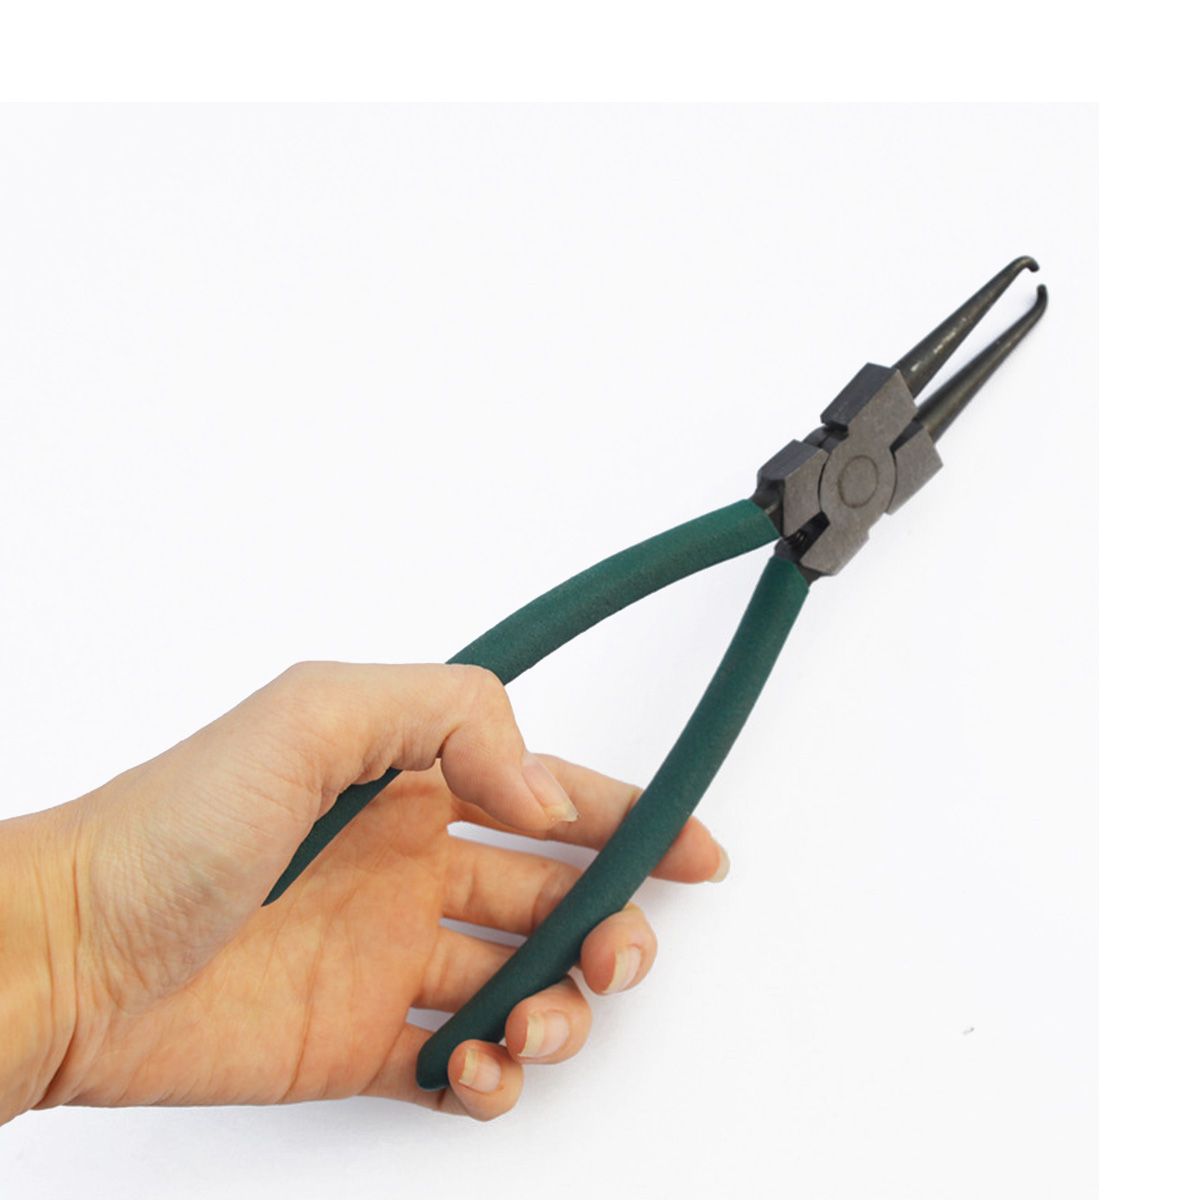 225mm-Fuel-Line-Pliers-Petrol-Clip-Pipe-Hose-Release-Disconnect-Removal-Tool-Kit-1612837